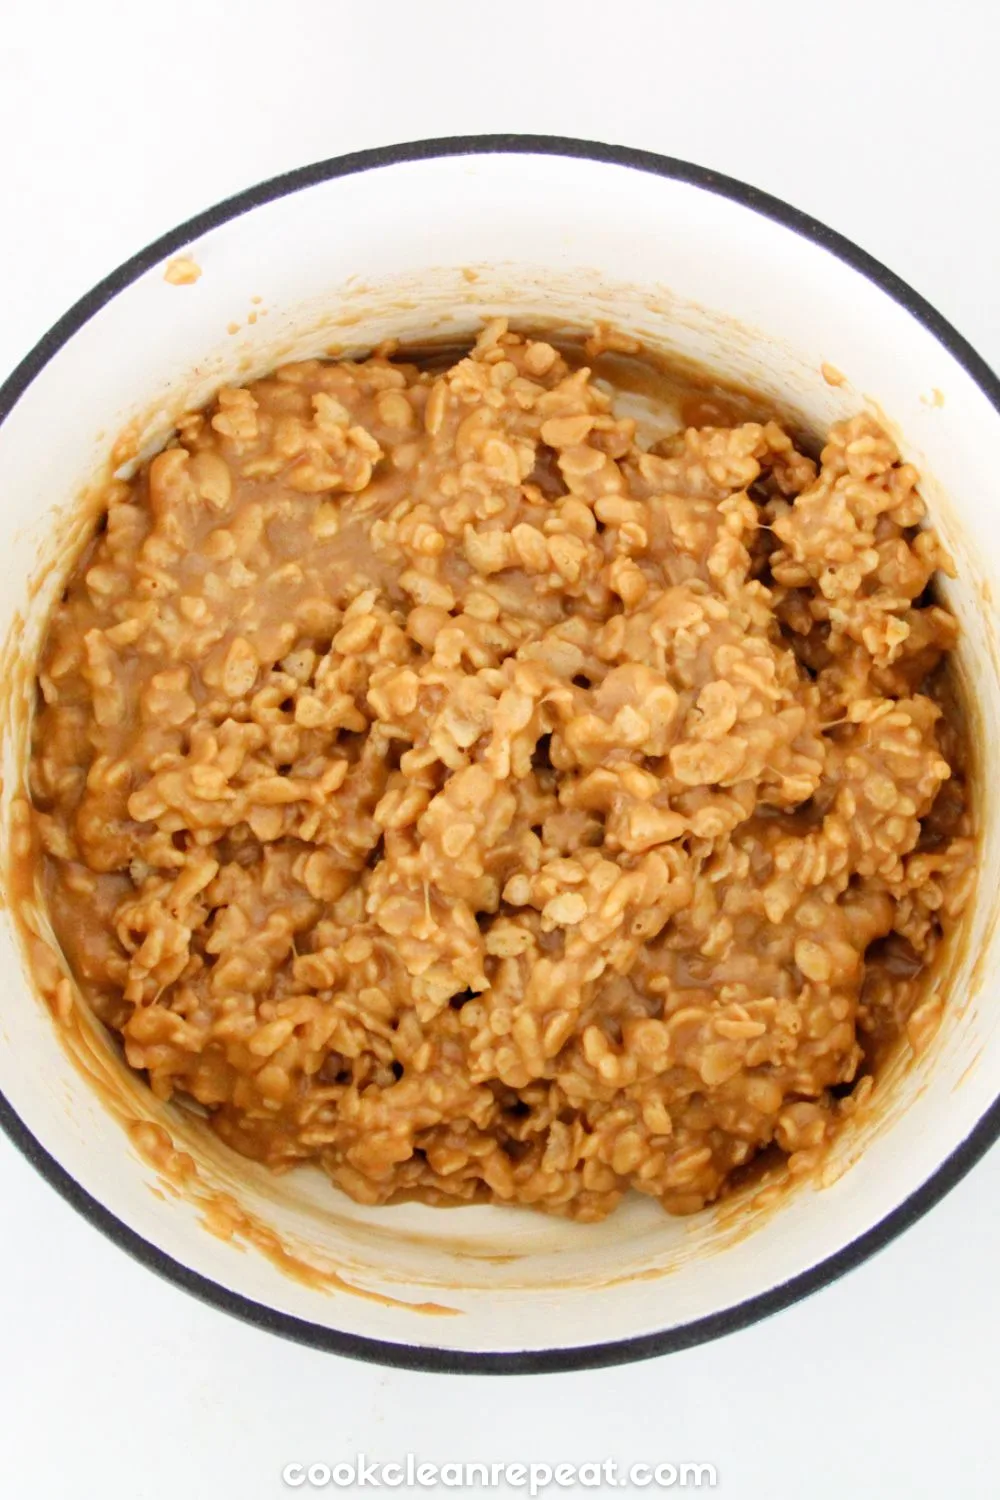 Rice Krispies mixed in with the other ingredients in the pot